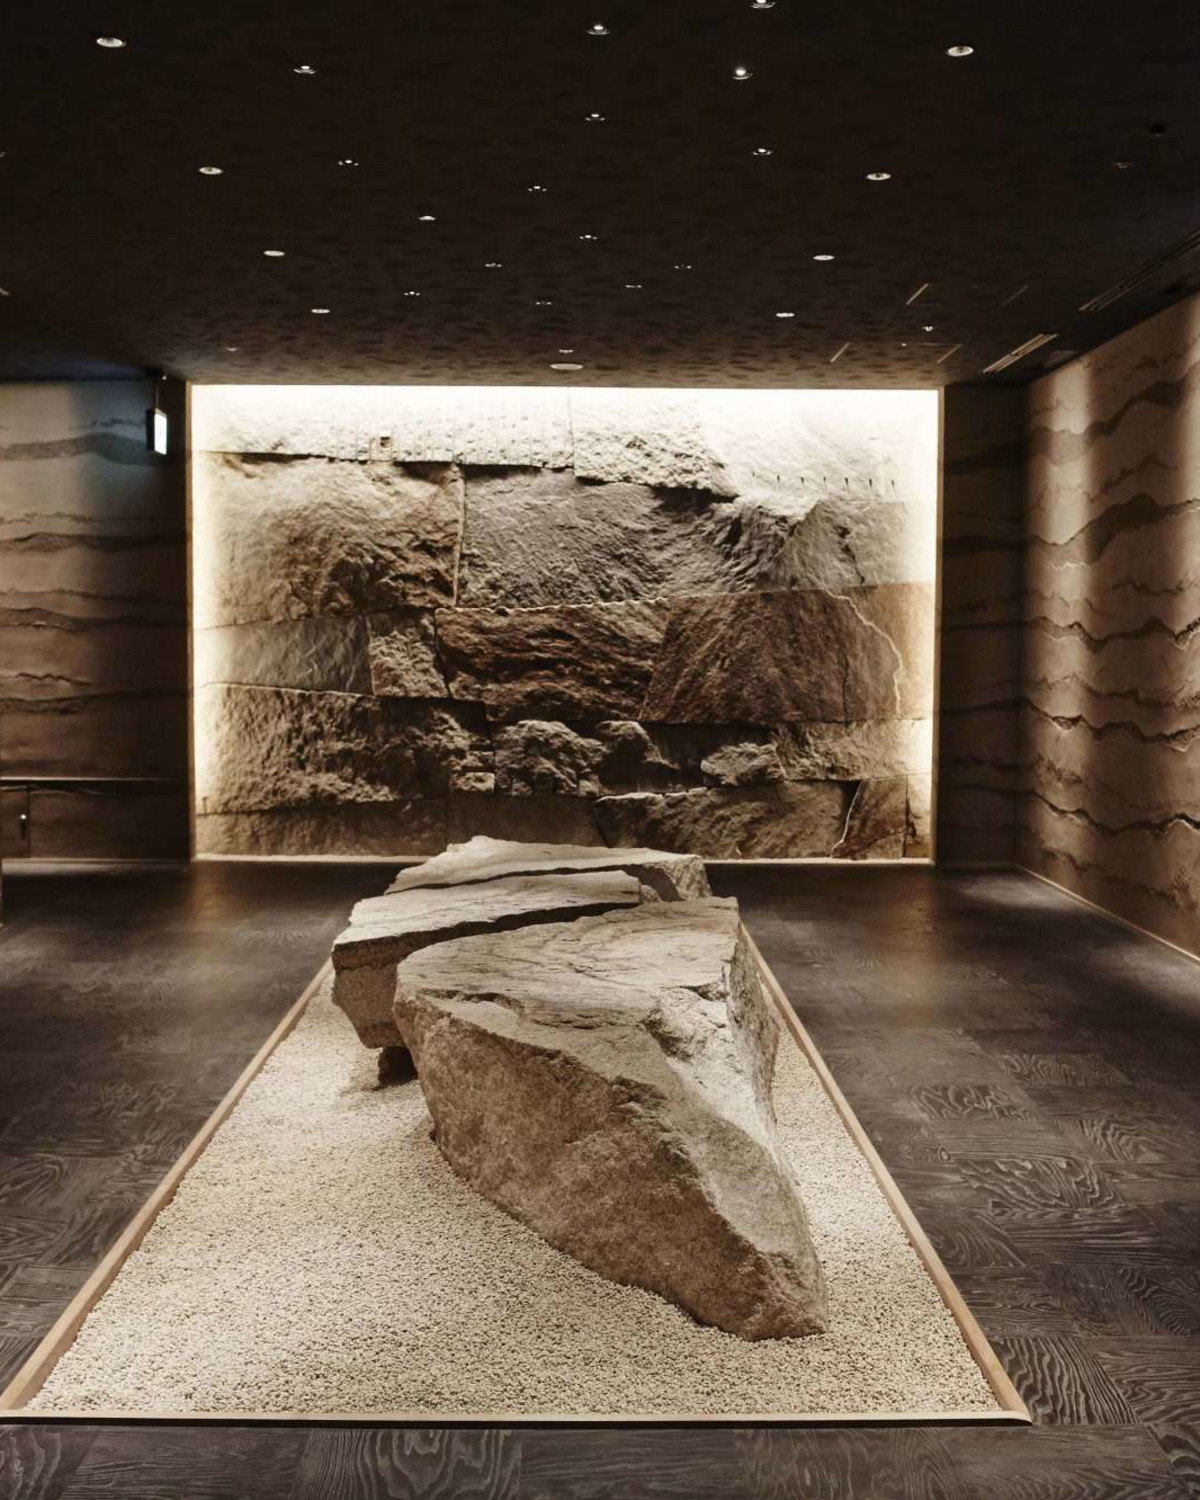 a dimly lit dining room with a large stone in the middle and stone walls